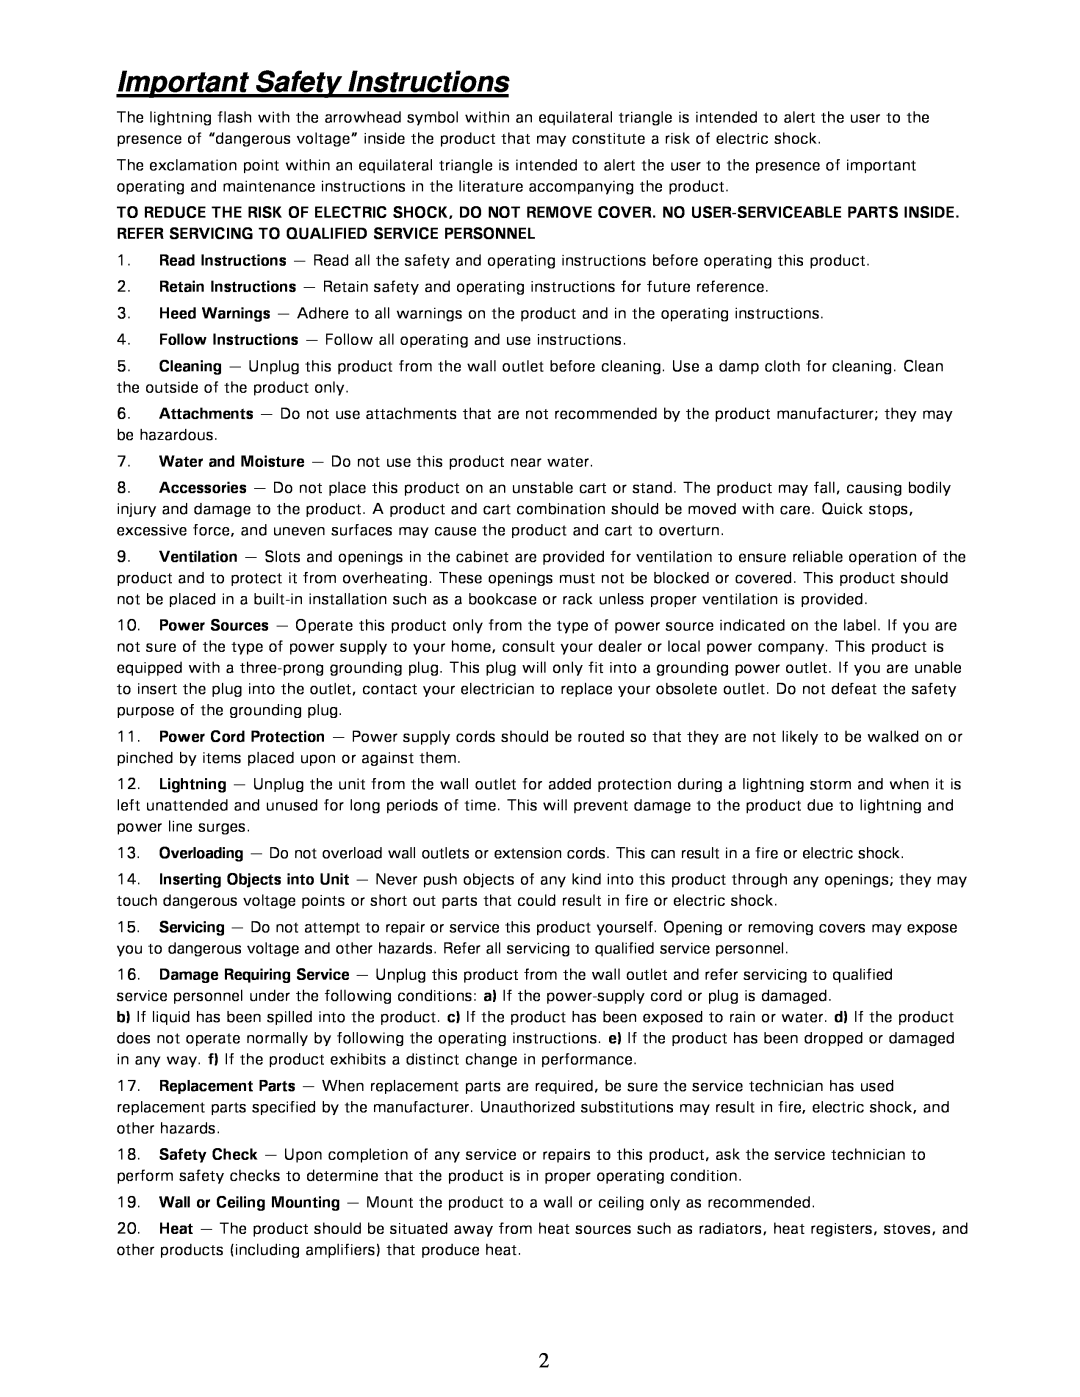 Parasound P 5 manual Important Safety Instructions 